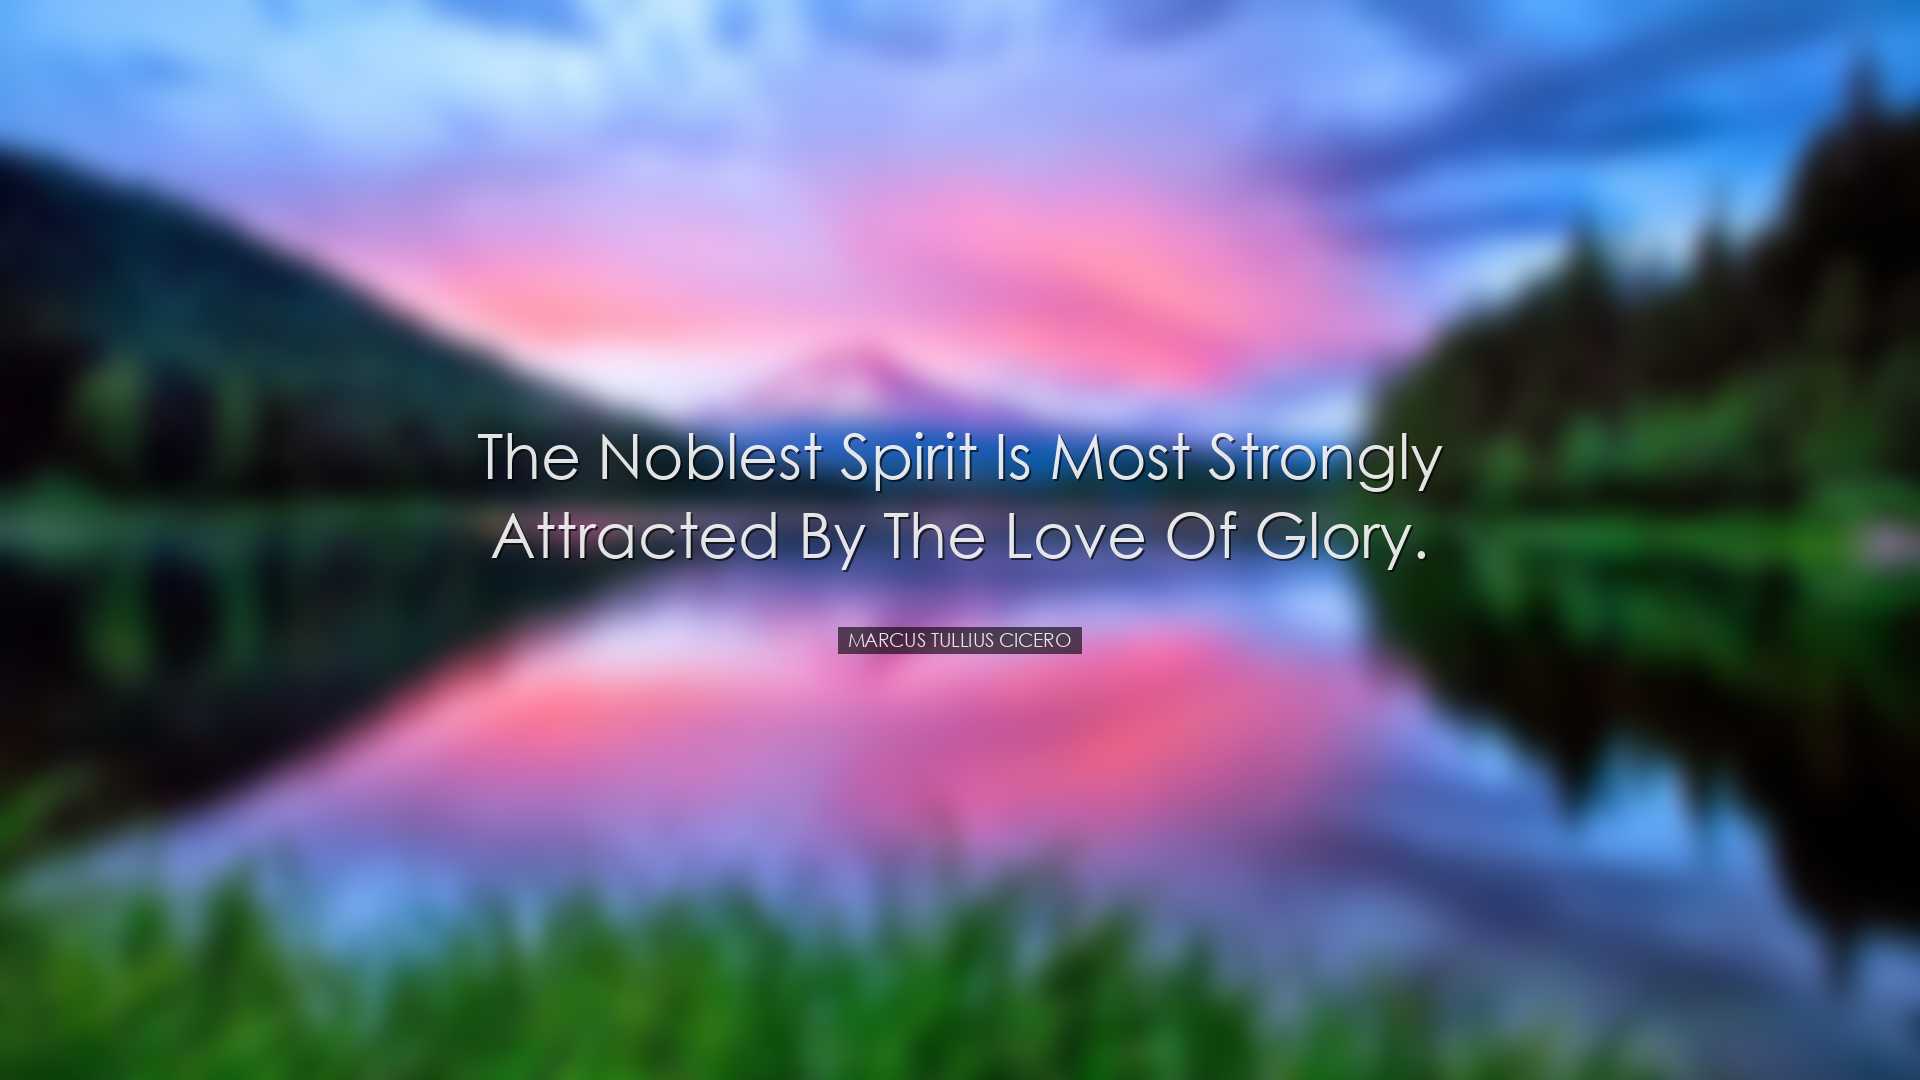 The noblest spirit is most strongly attracted by the love of glory